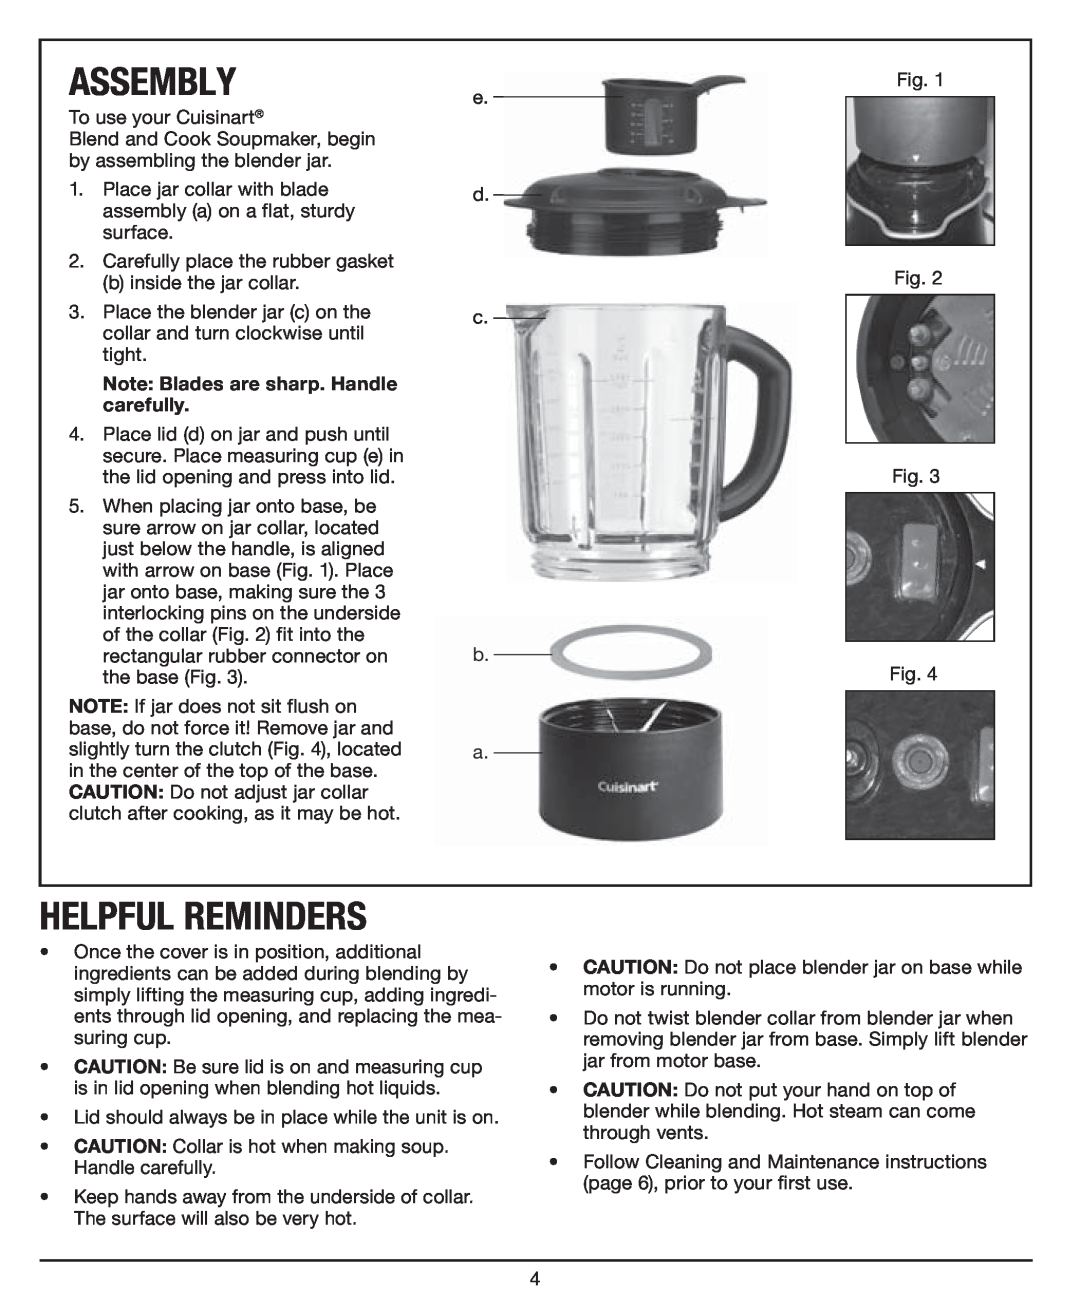 Cuisinart SBC1000, SBC-1000, Blend and Cook Soupmaker Assembly, Helpful Reminders, Note Blades are sharp. Handle carefully 